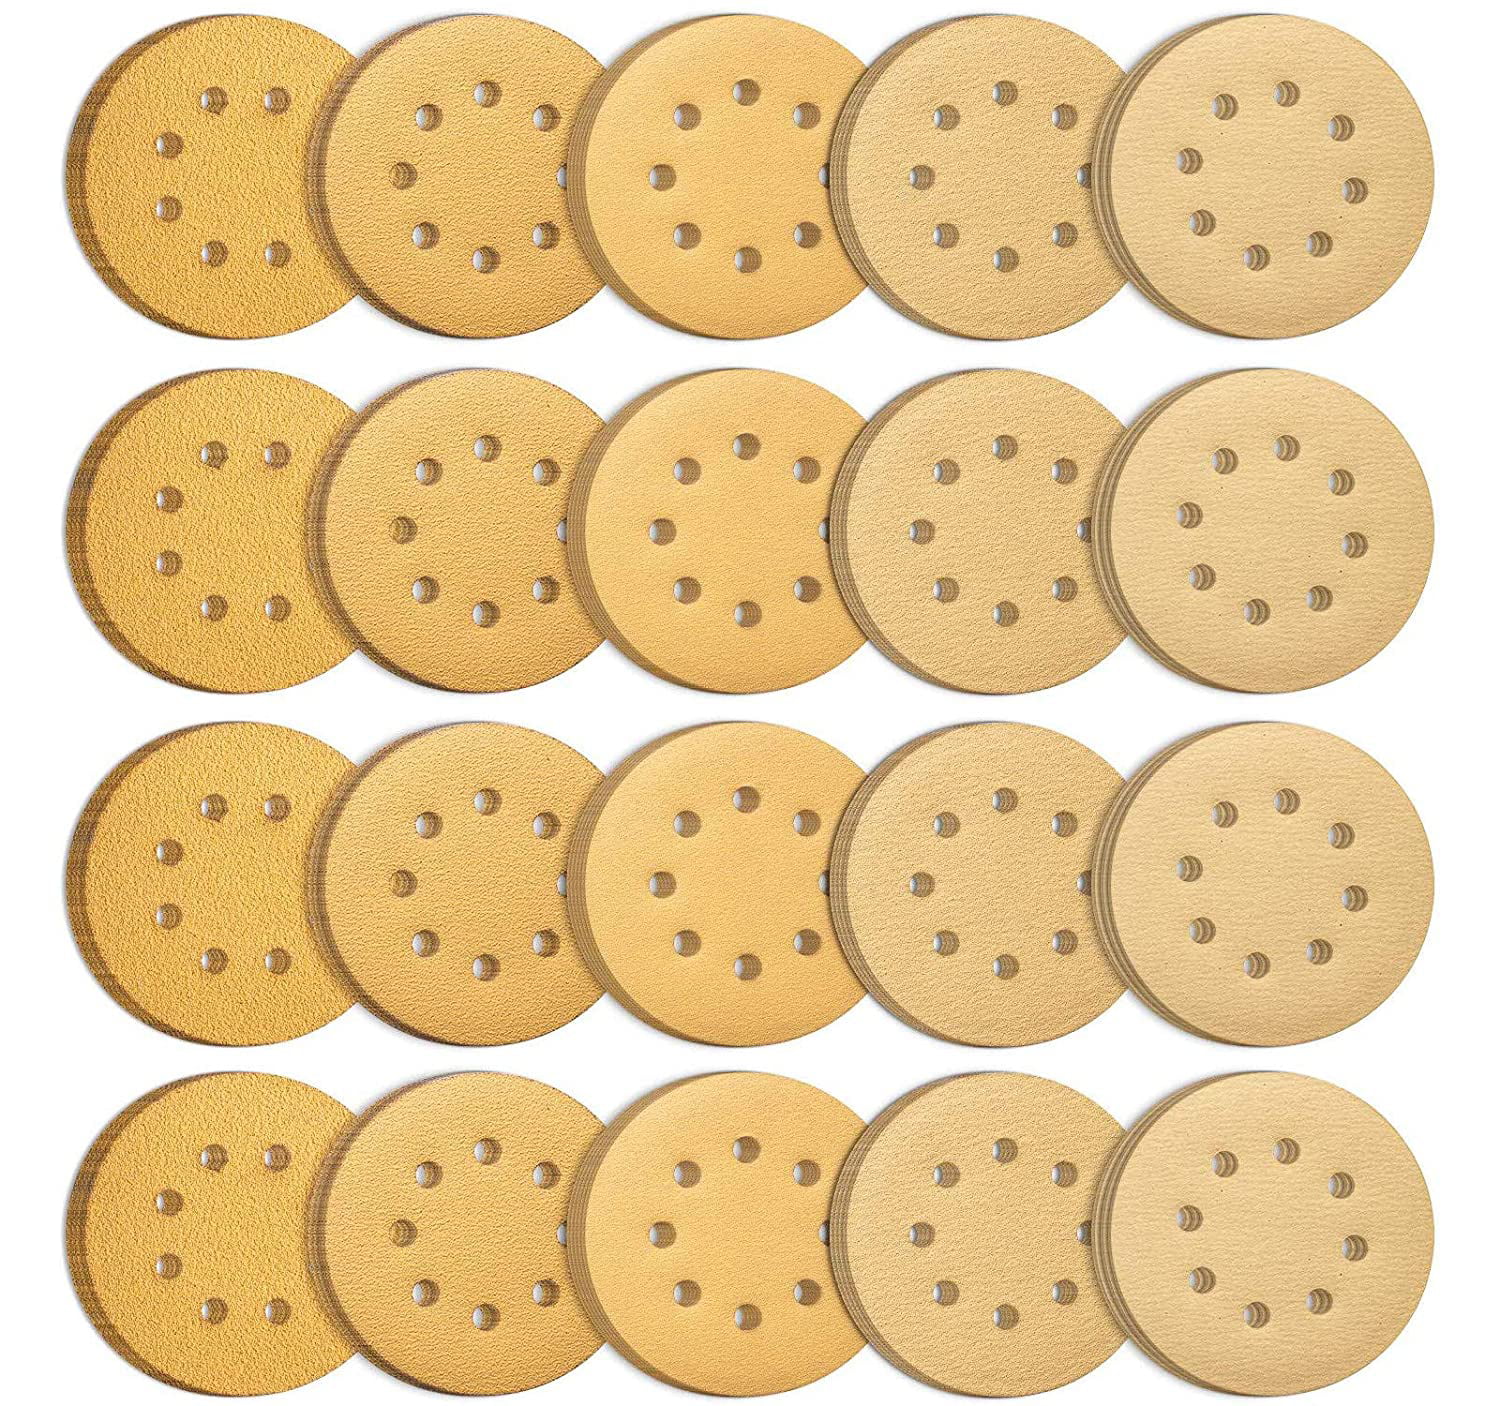 Sanding Mouse Mini Detail Sander with 50 Pre-Cut Gold Sanding Strips • 10 each of The Following Grits are Included: 80 120 220 and 400 150 